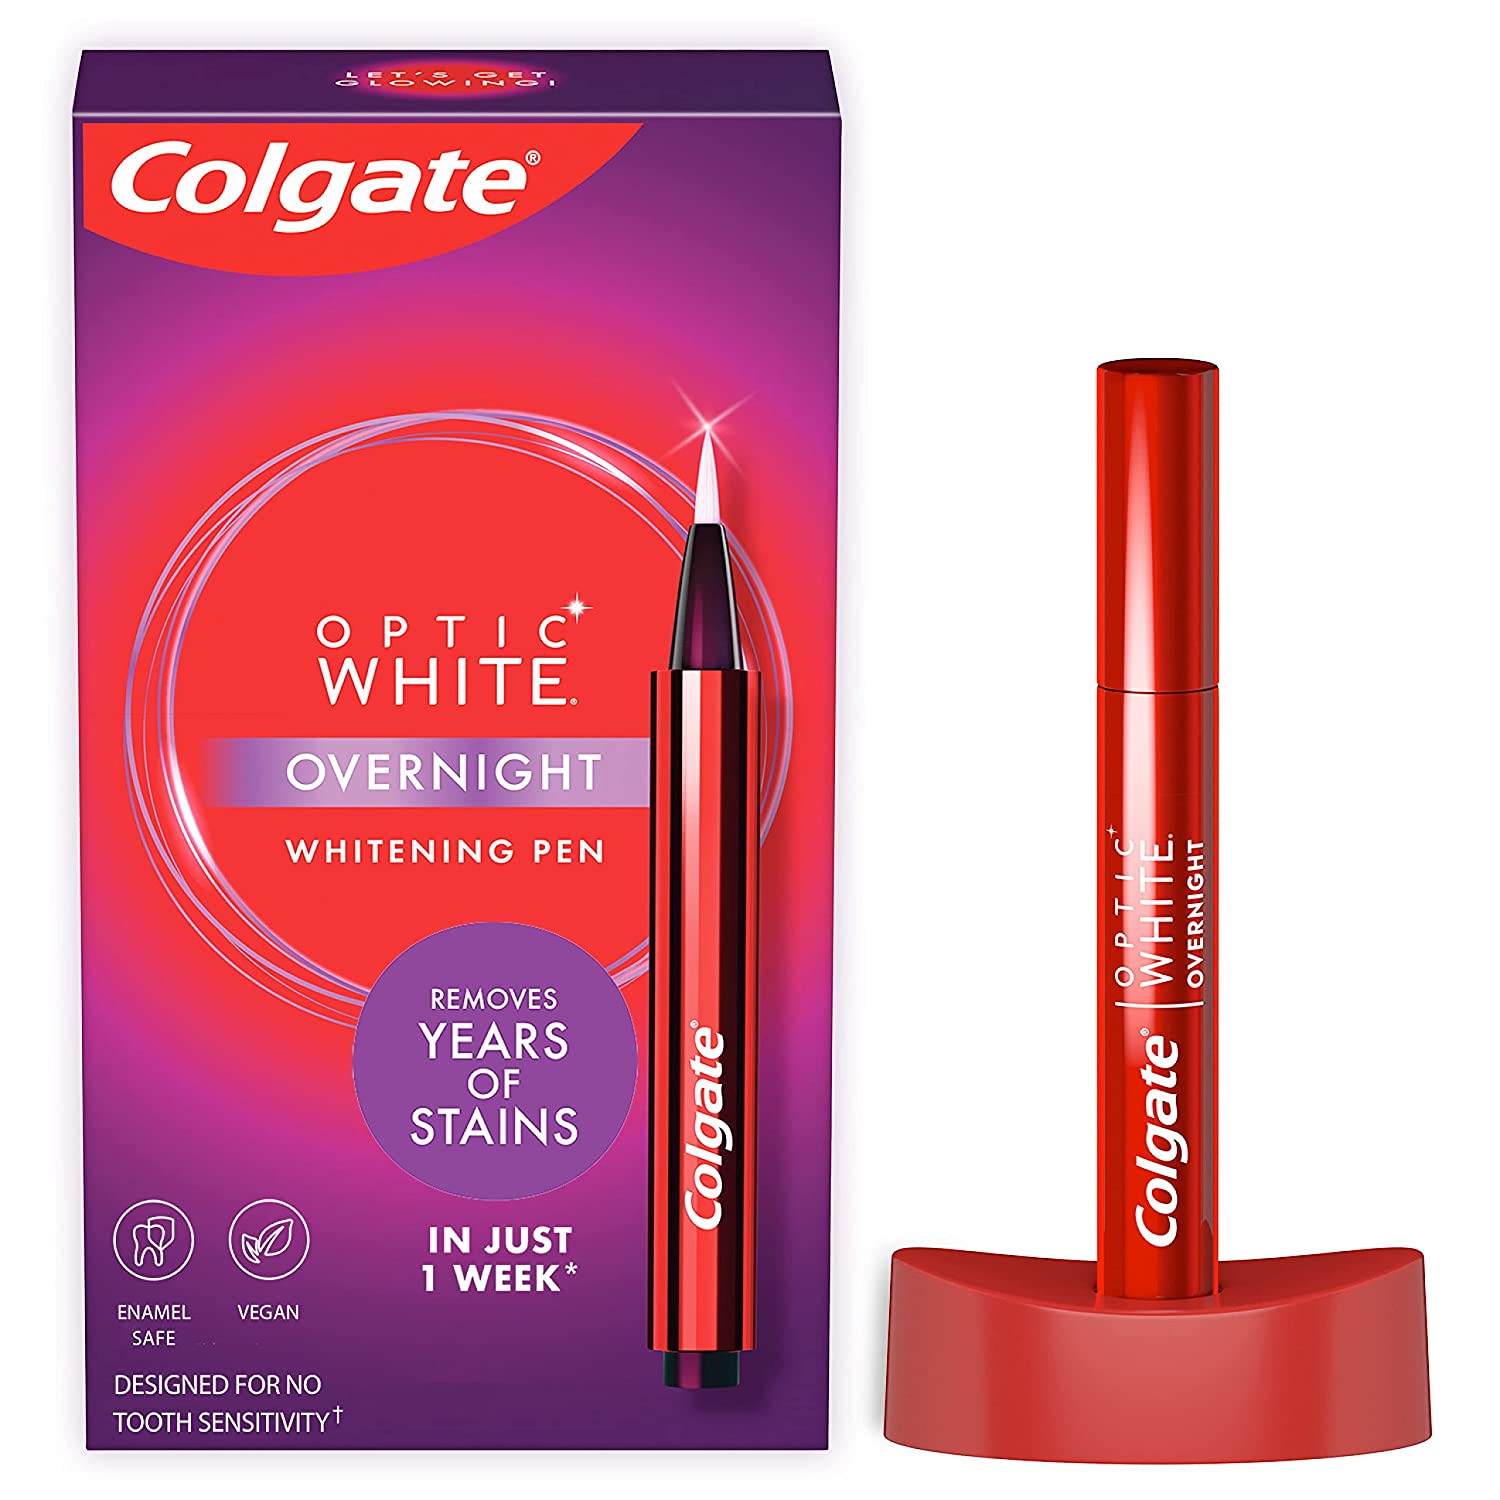 0.08-Oz Colgate Optic White Overnight Teeth Whitening Pen (35 Nightly Treatments) $14.24 w/ S&S + Free Shipping w/ Prime or on $25+